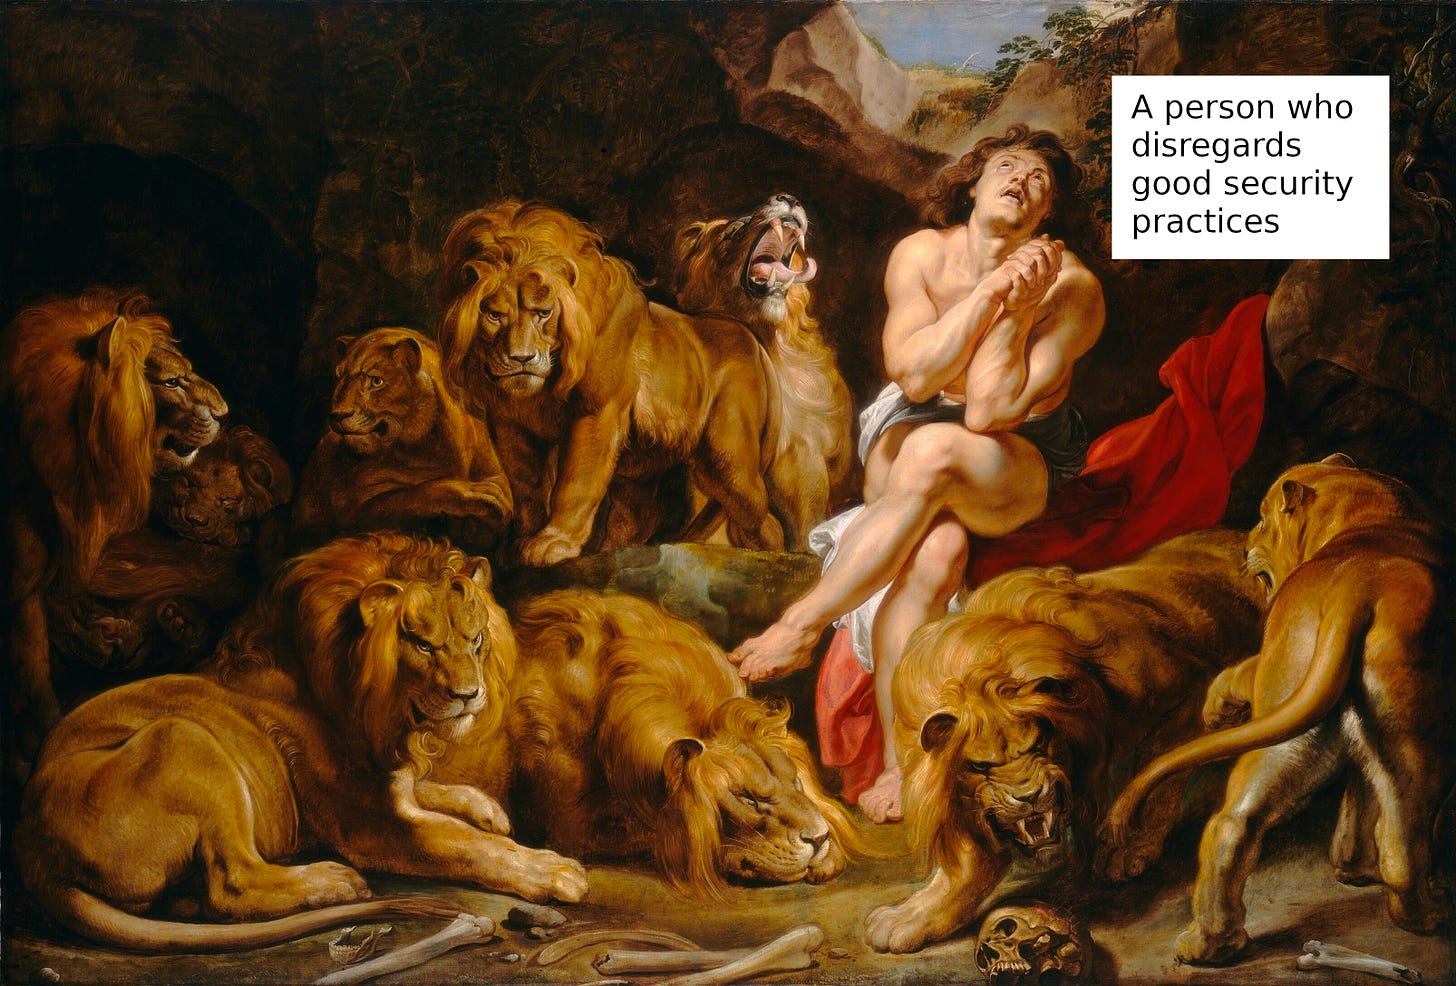 A classic image of a person in the lions' den. The person clearly ignores good security practices.